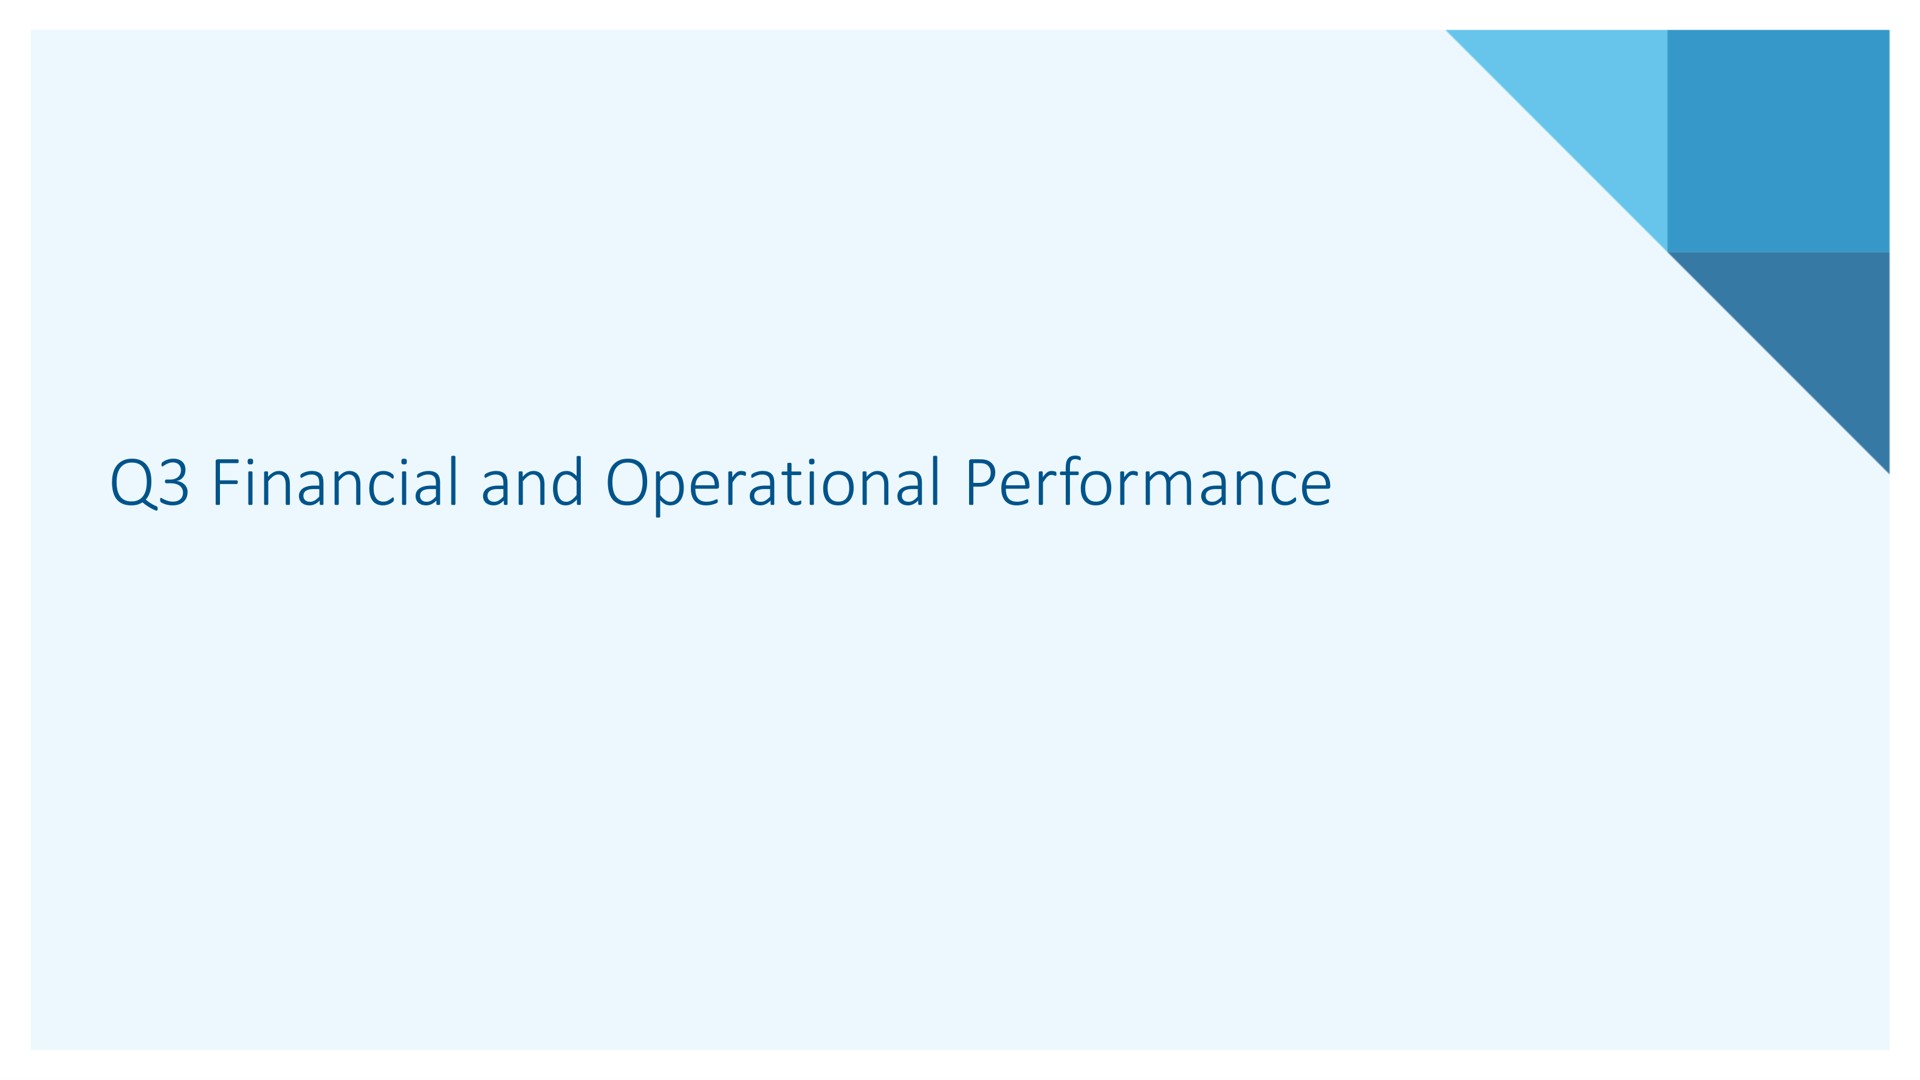 financial and operational performance | Alkermes